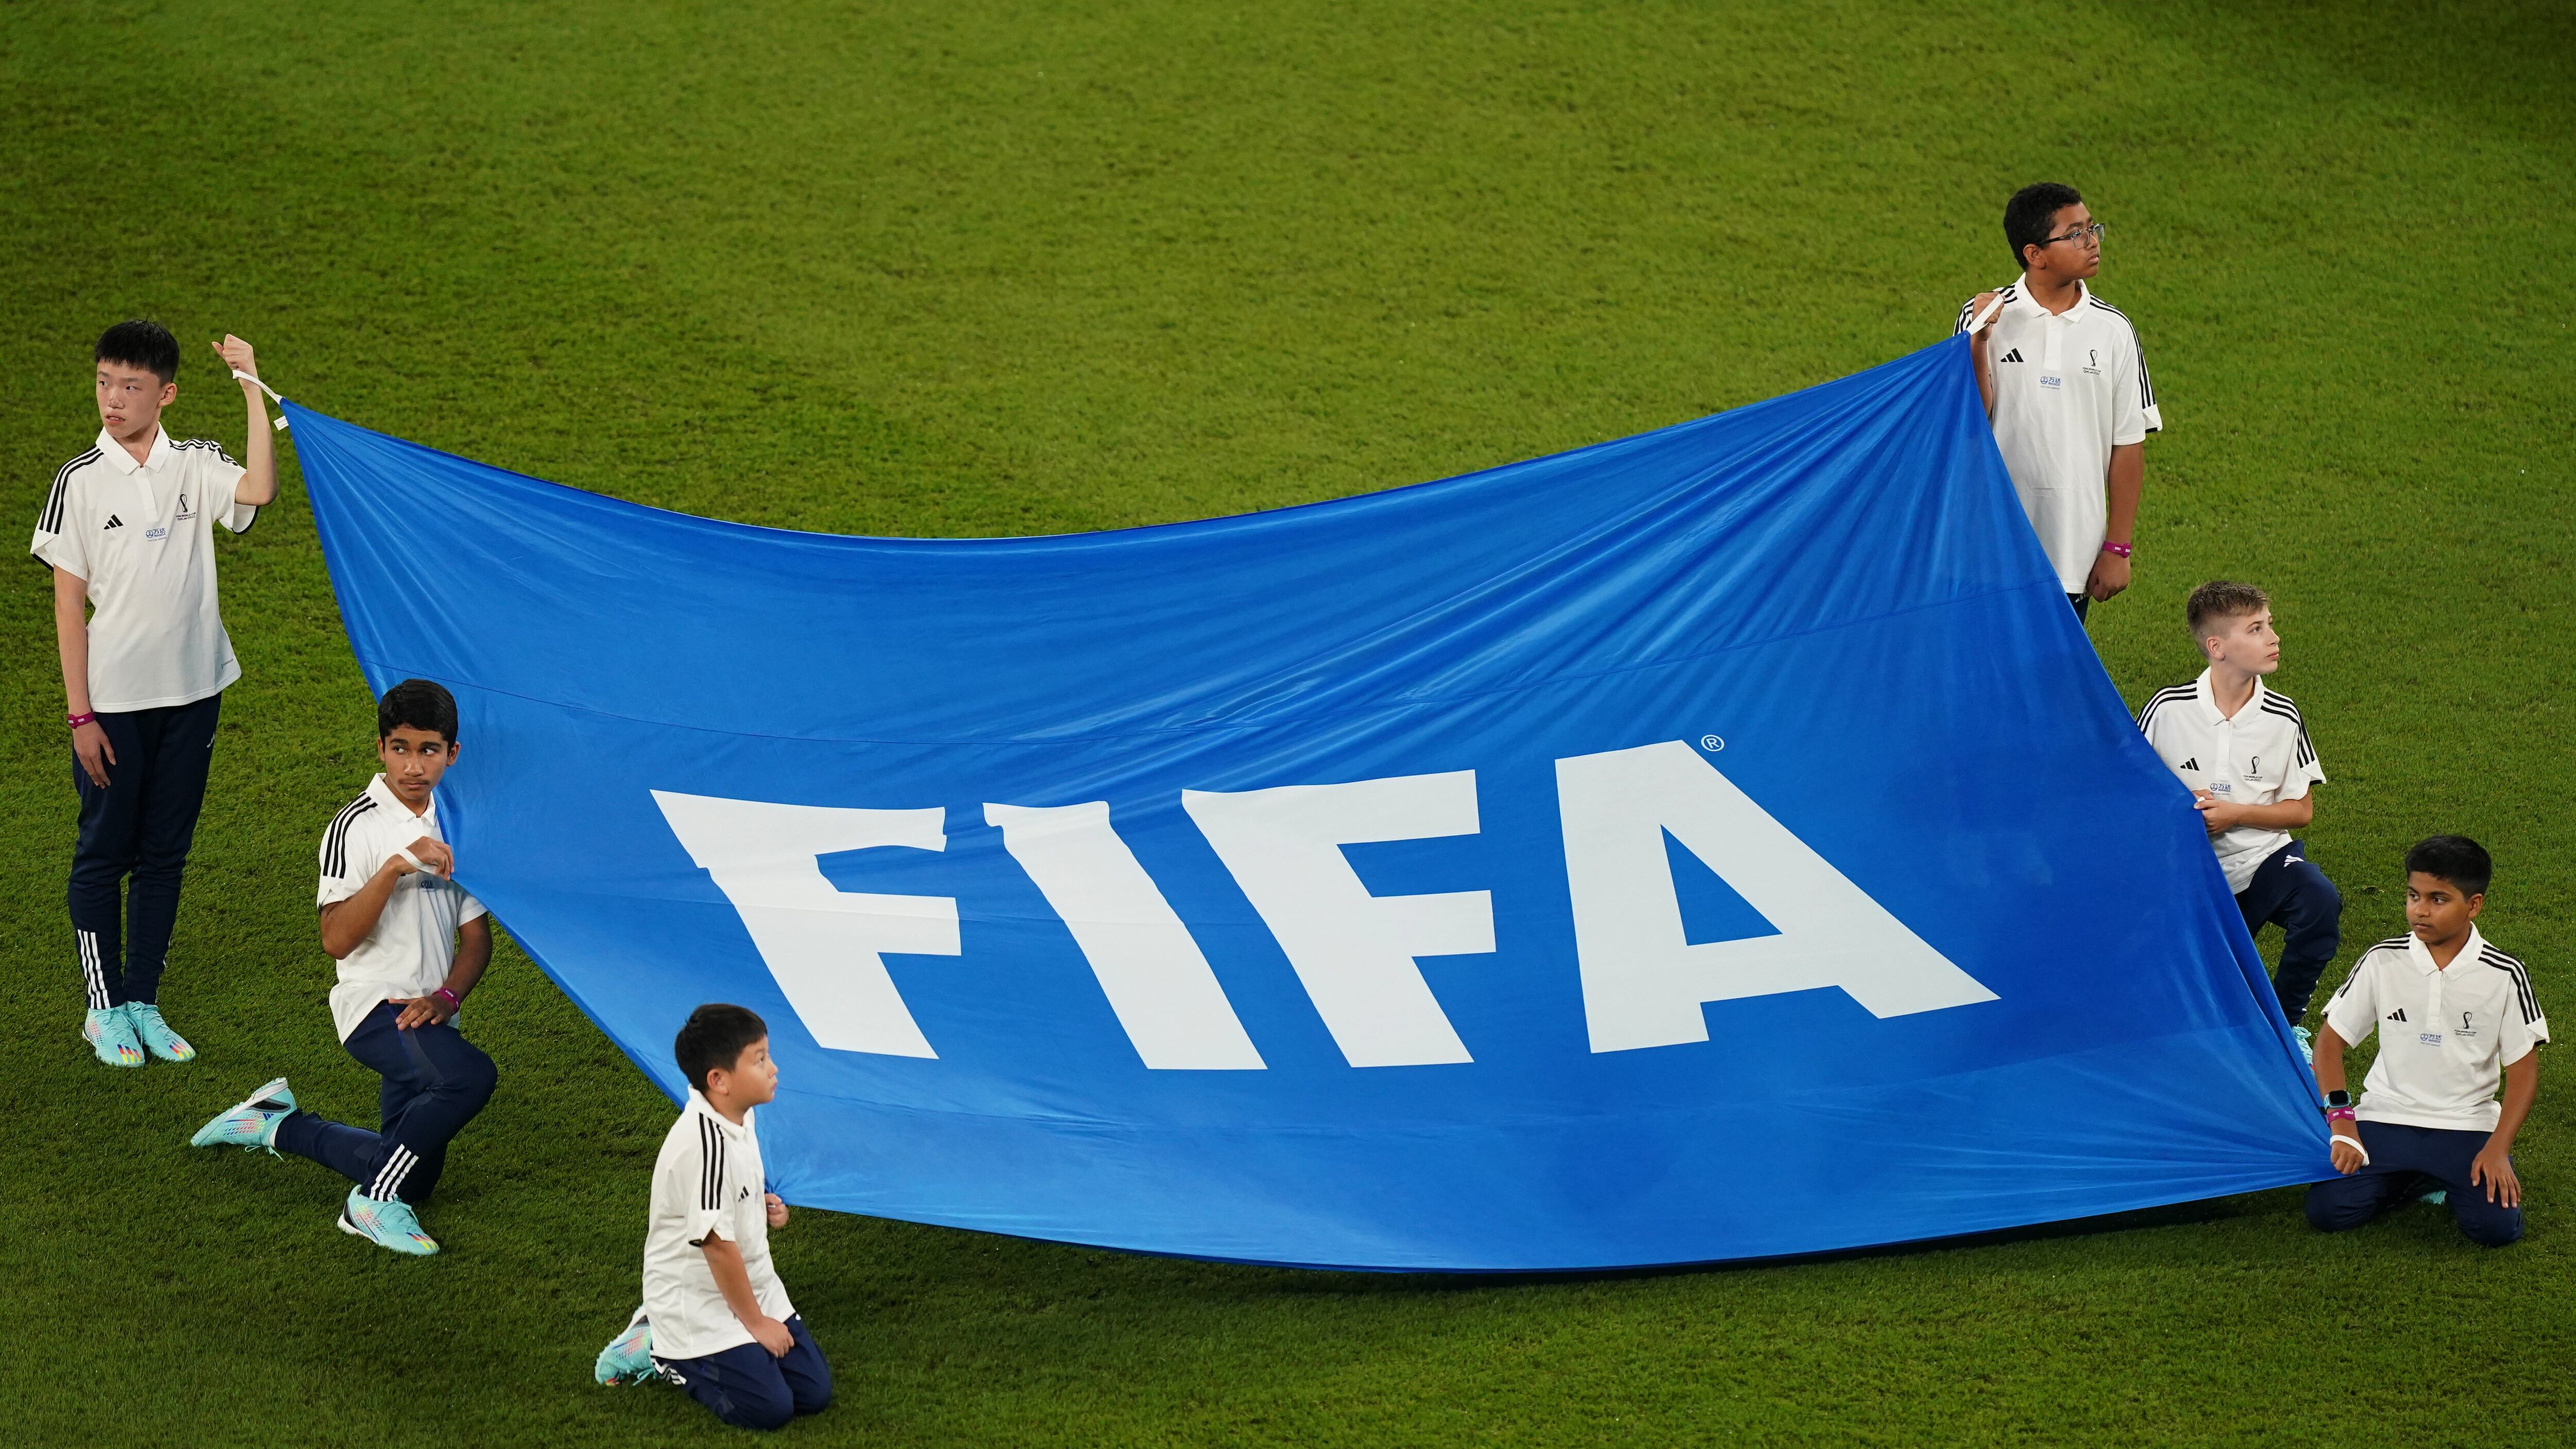 FIFA is facing legal action over player workloads